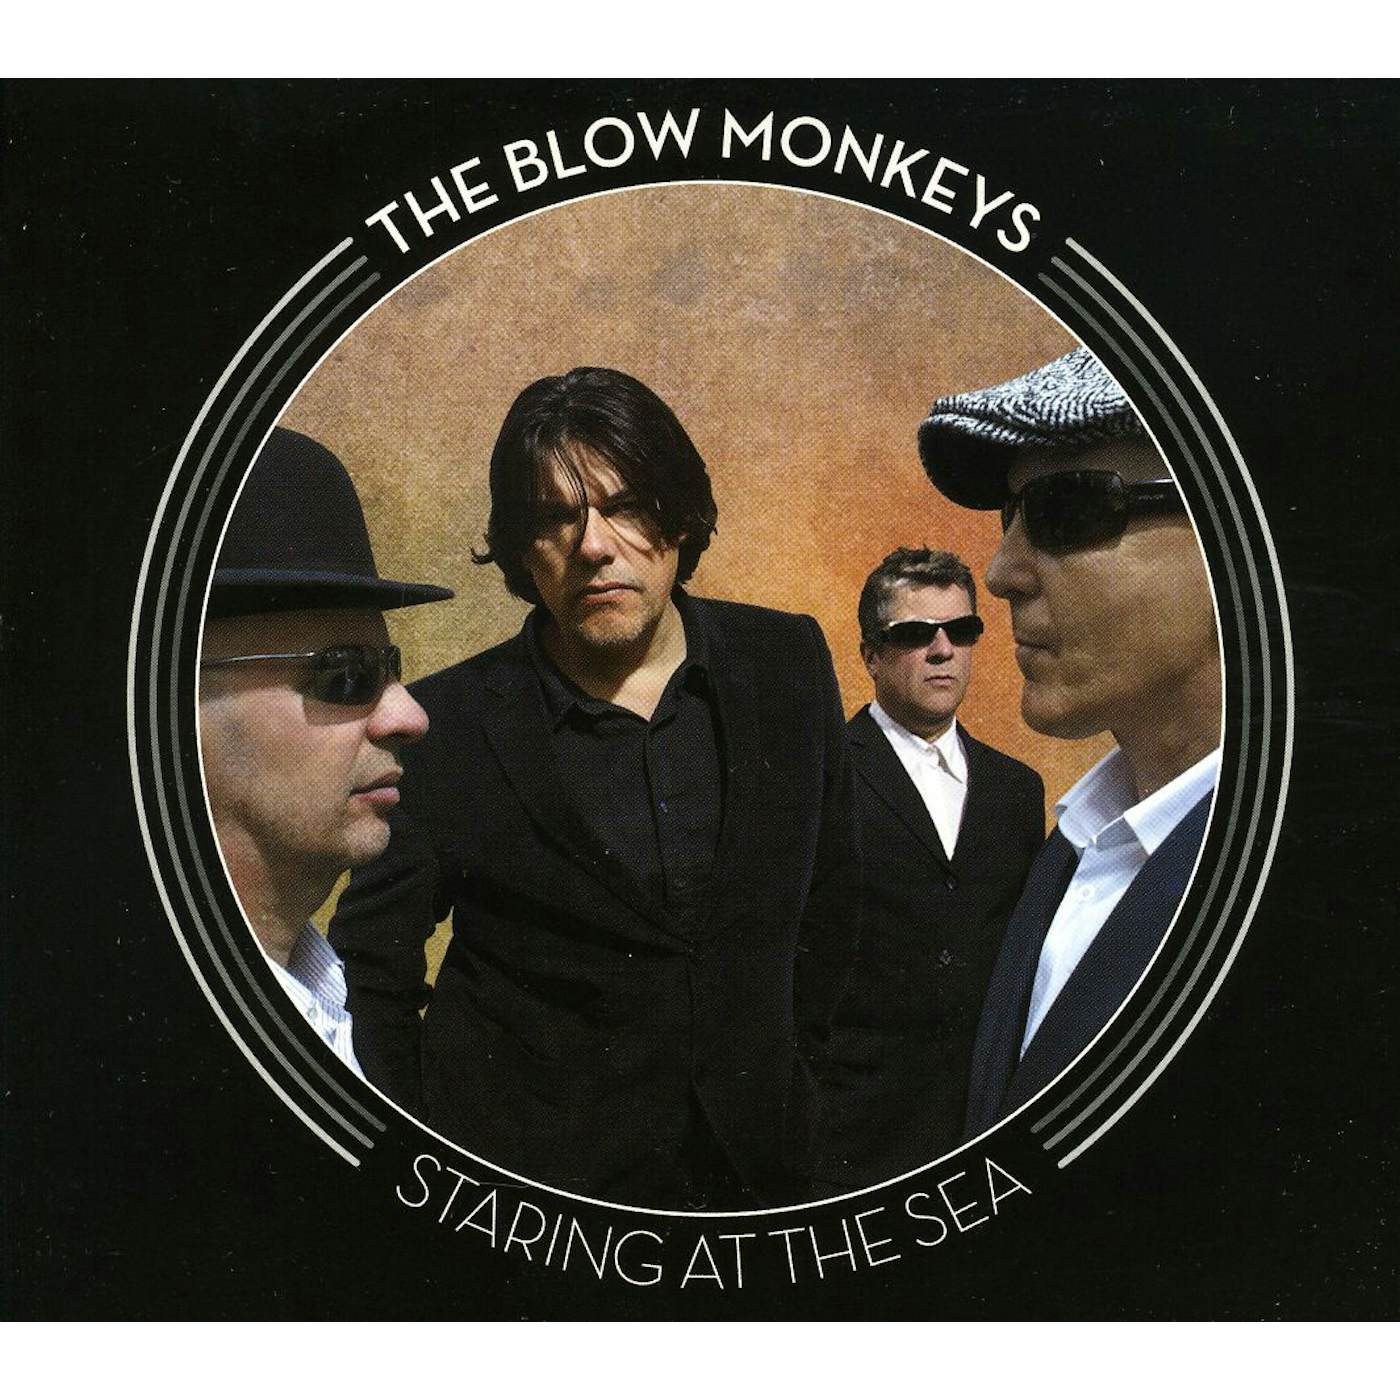 The Blow Monkeys STARING AT THE SEA CD